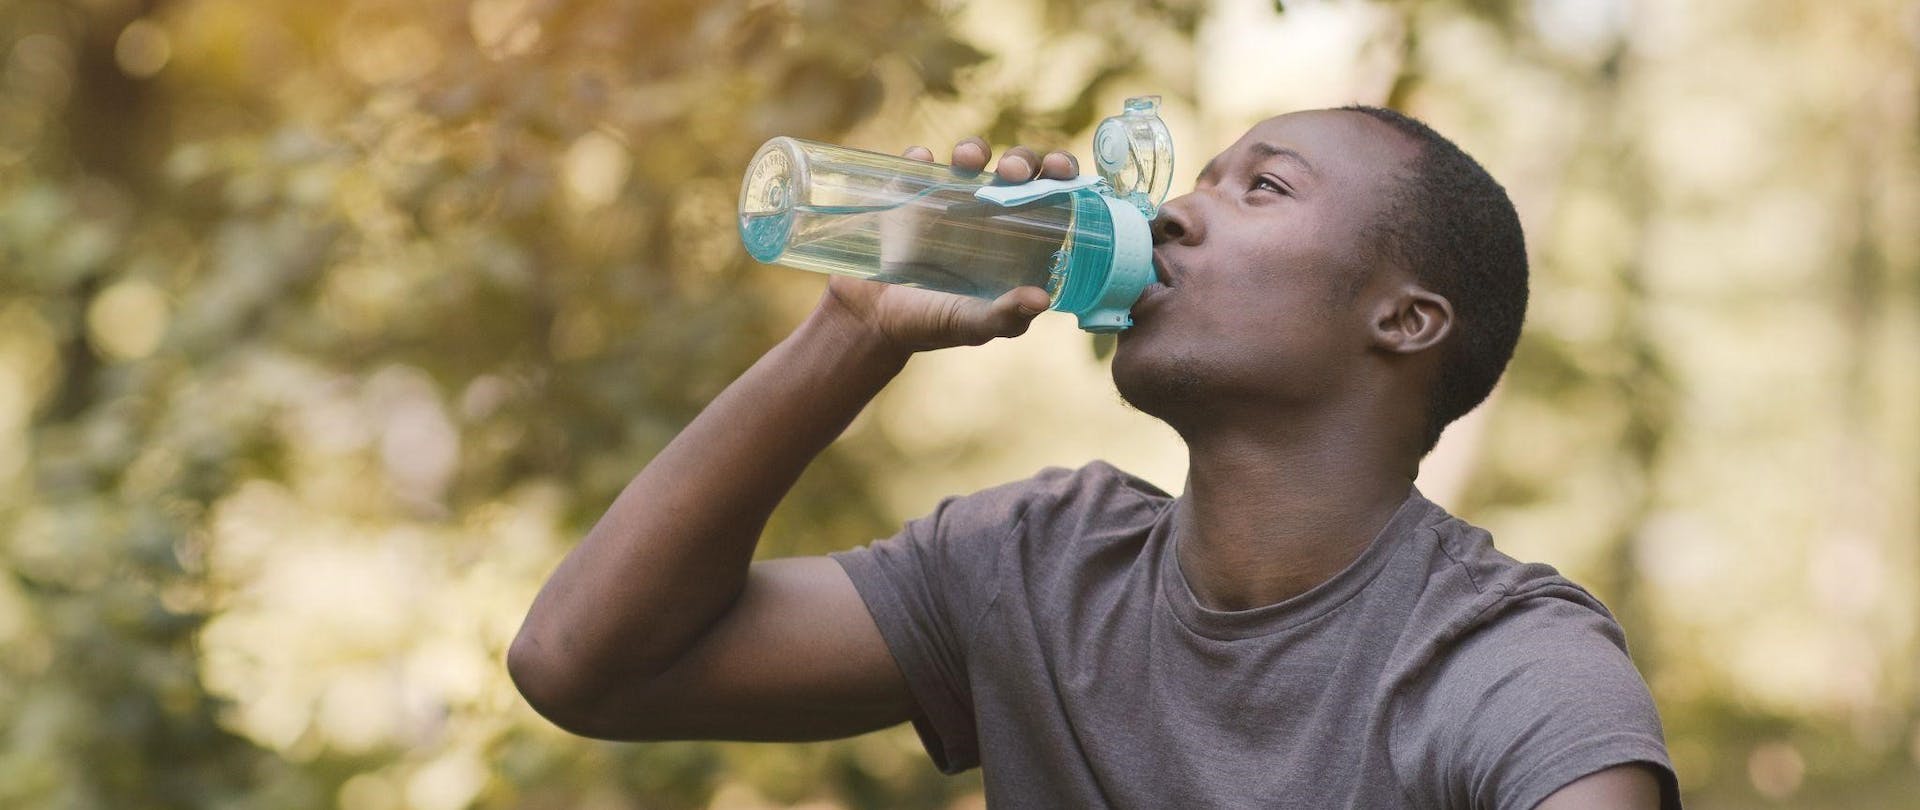 Green & Clean: How Many Water Bottles Should I Drink a Day?